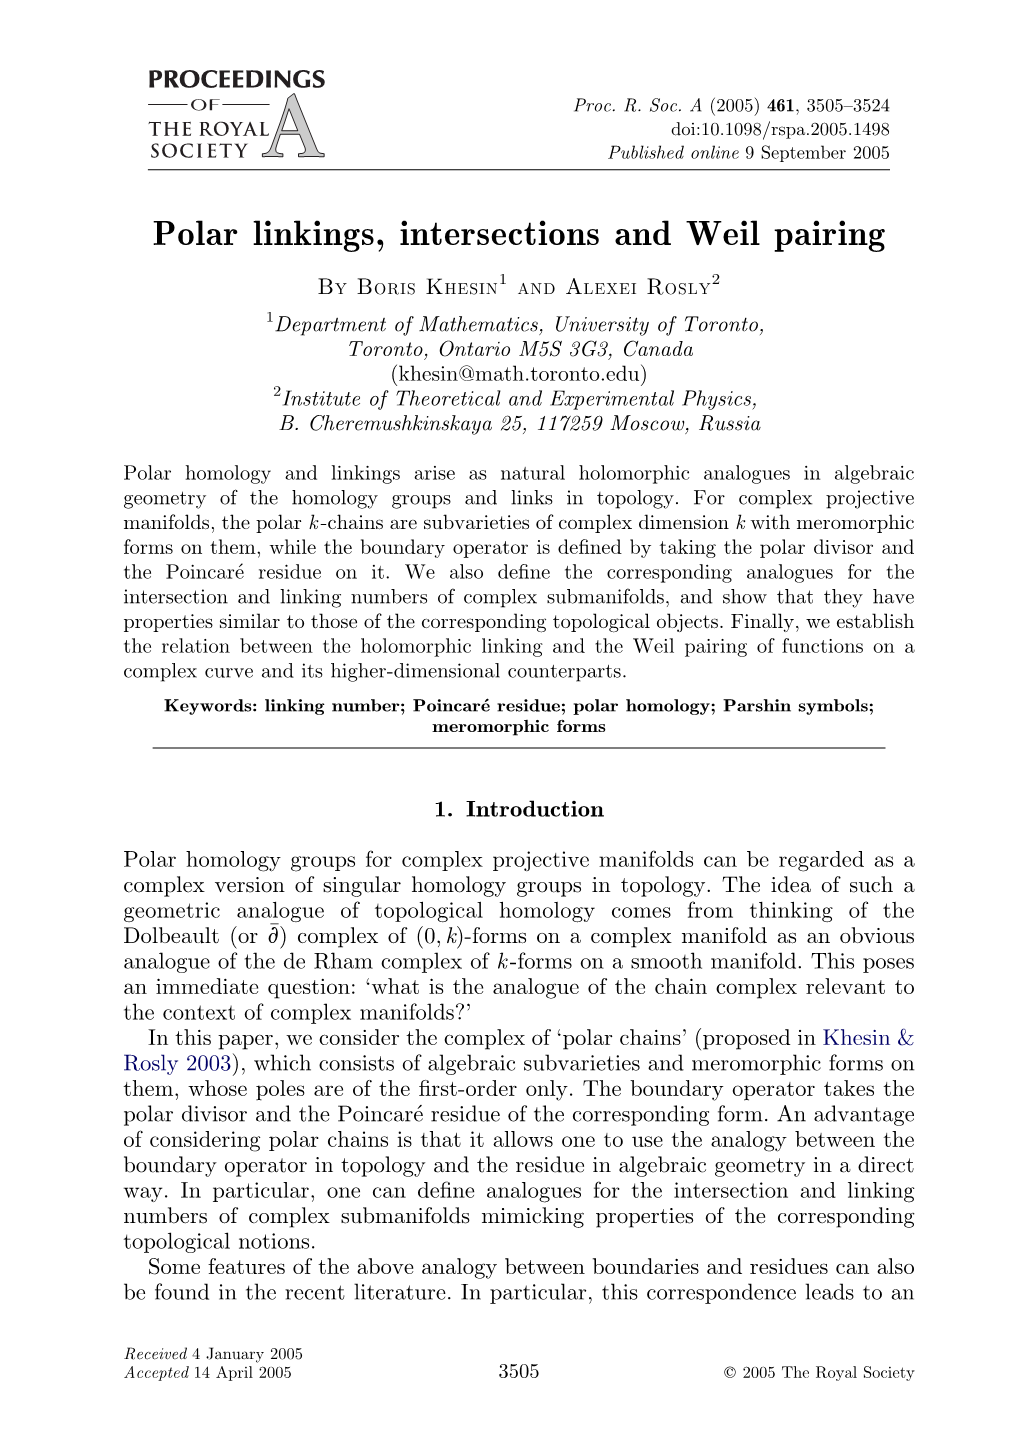 Polar Linkings, Intersections and Weil Pairing